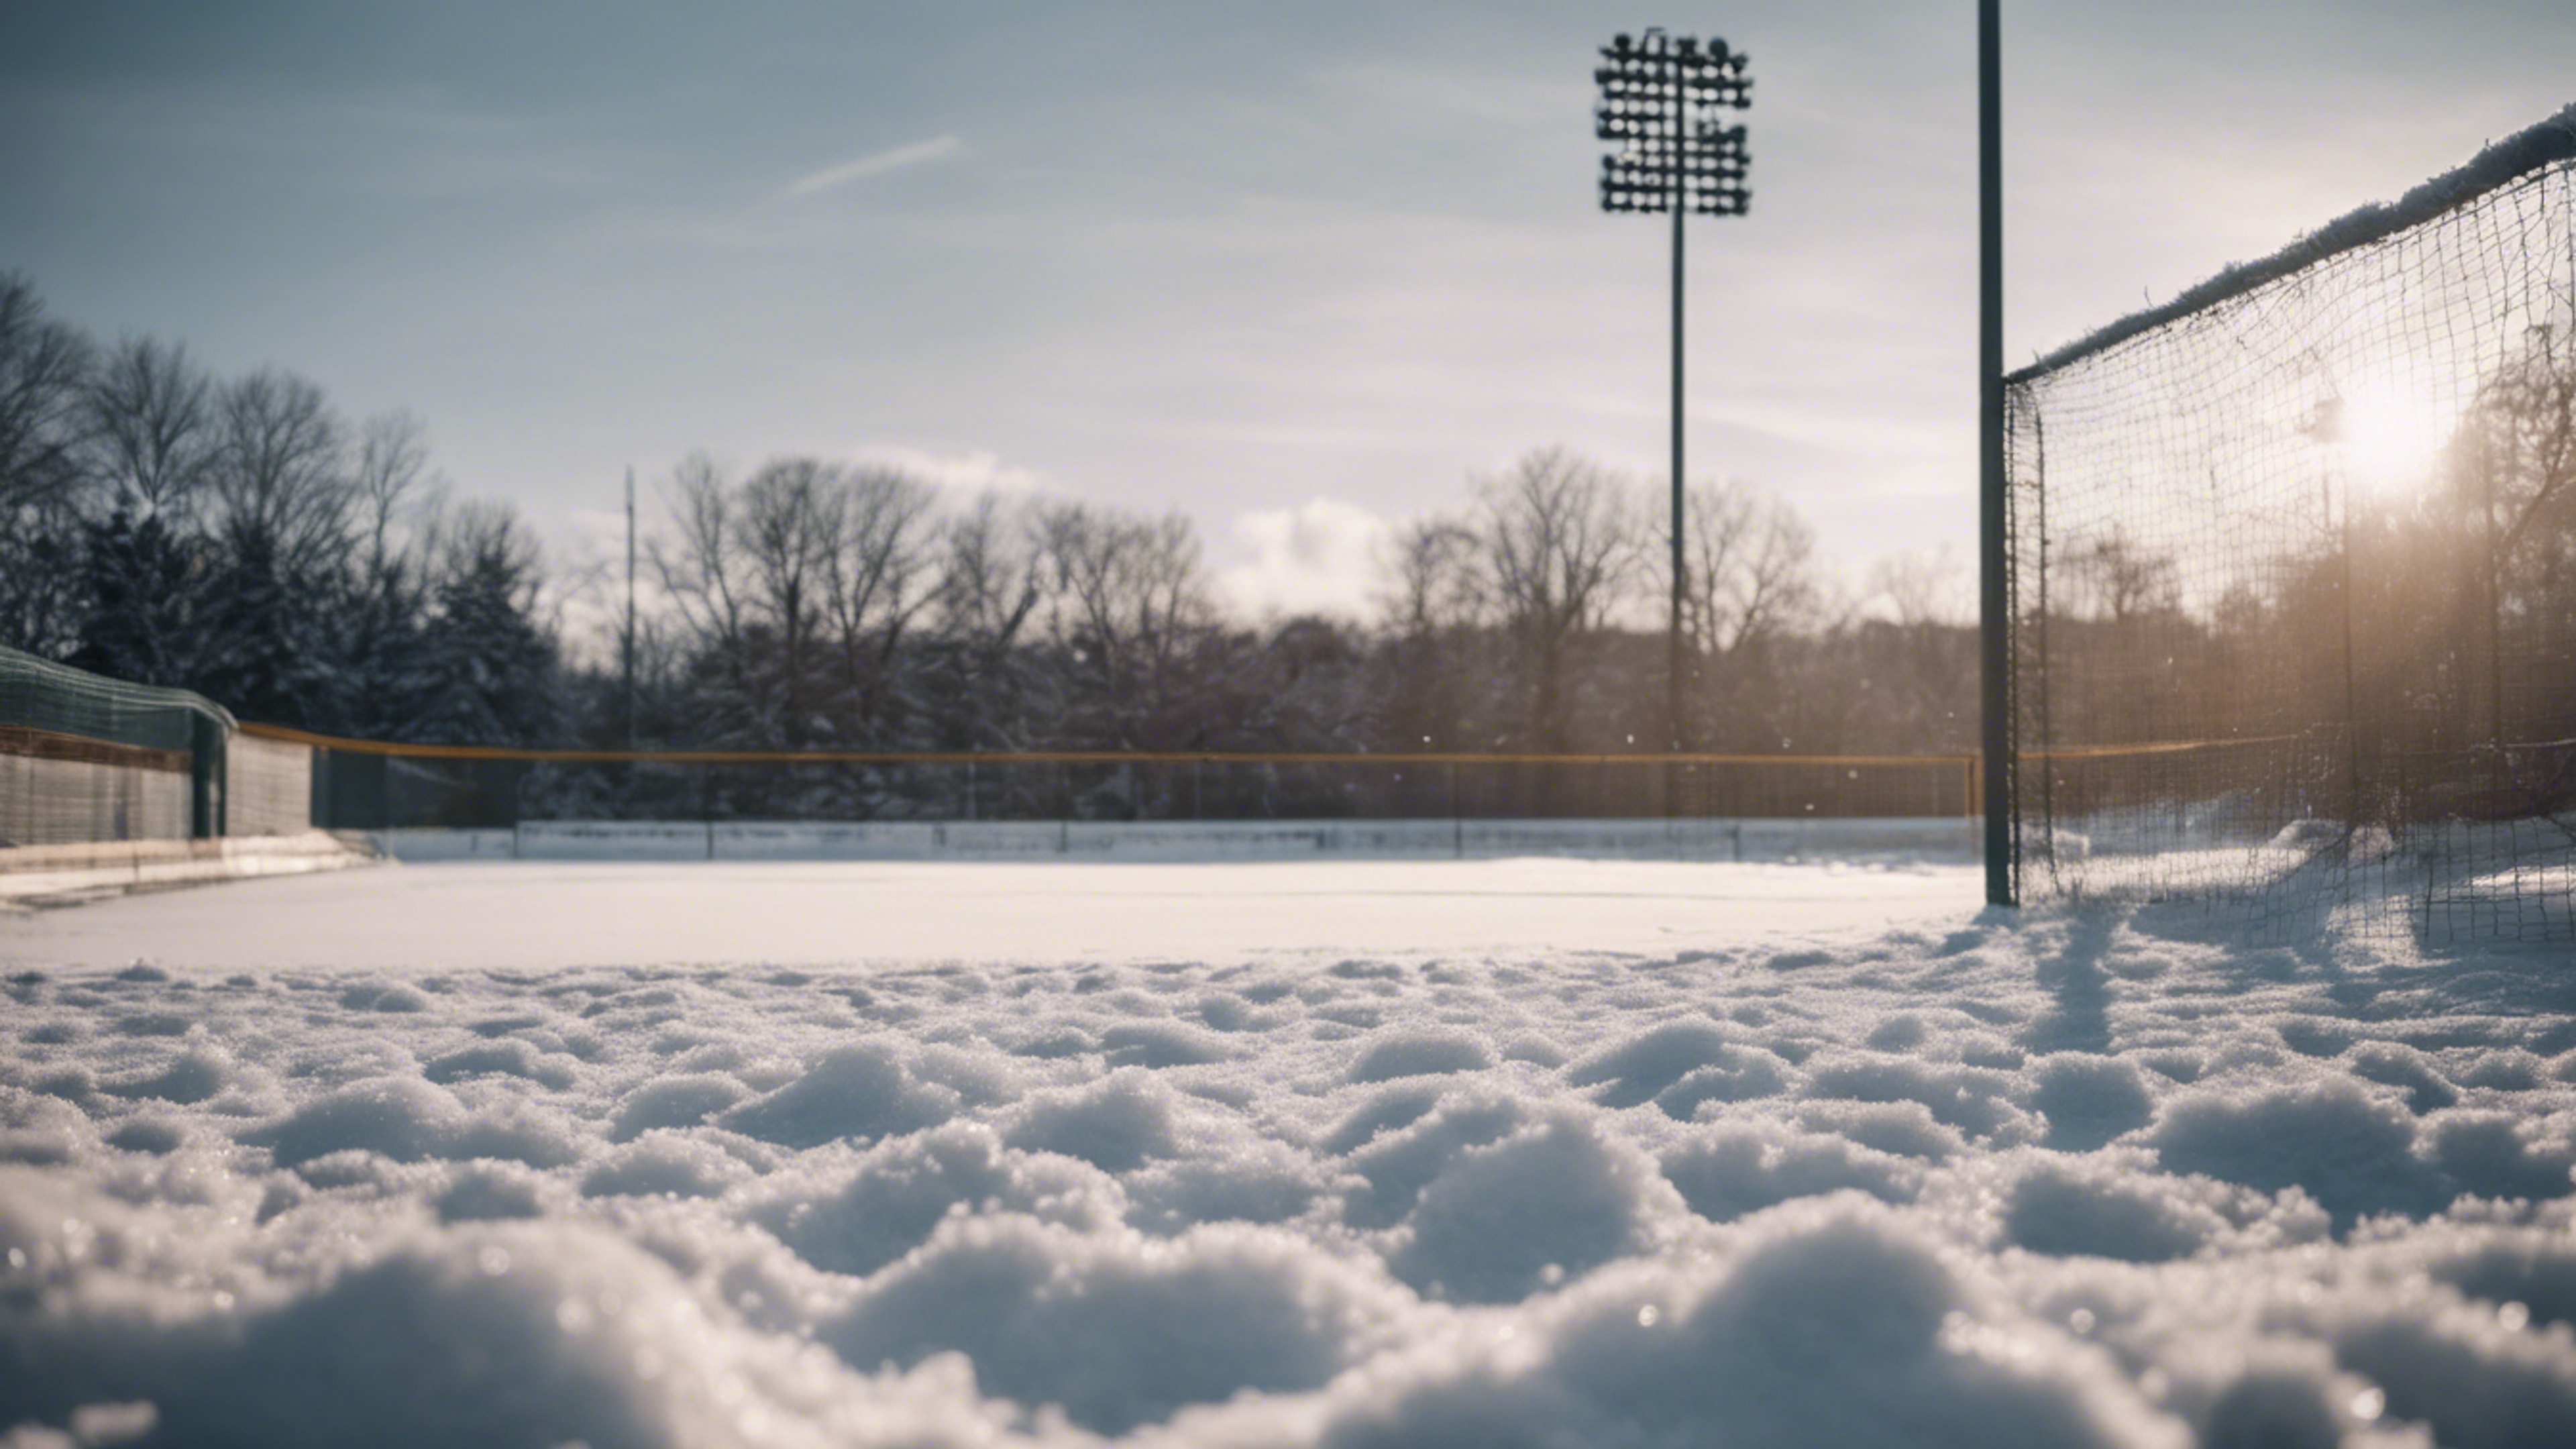 A baseball field covered in a thin layer of snow during off-season. ផ្ទាំង​រូបភាព[abf98c57f7b048239f2f]